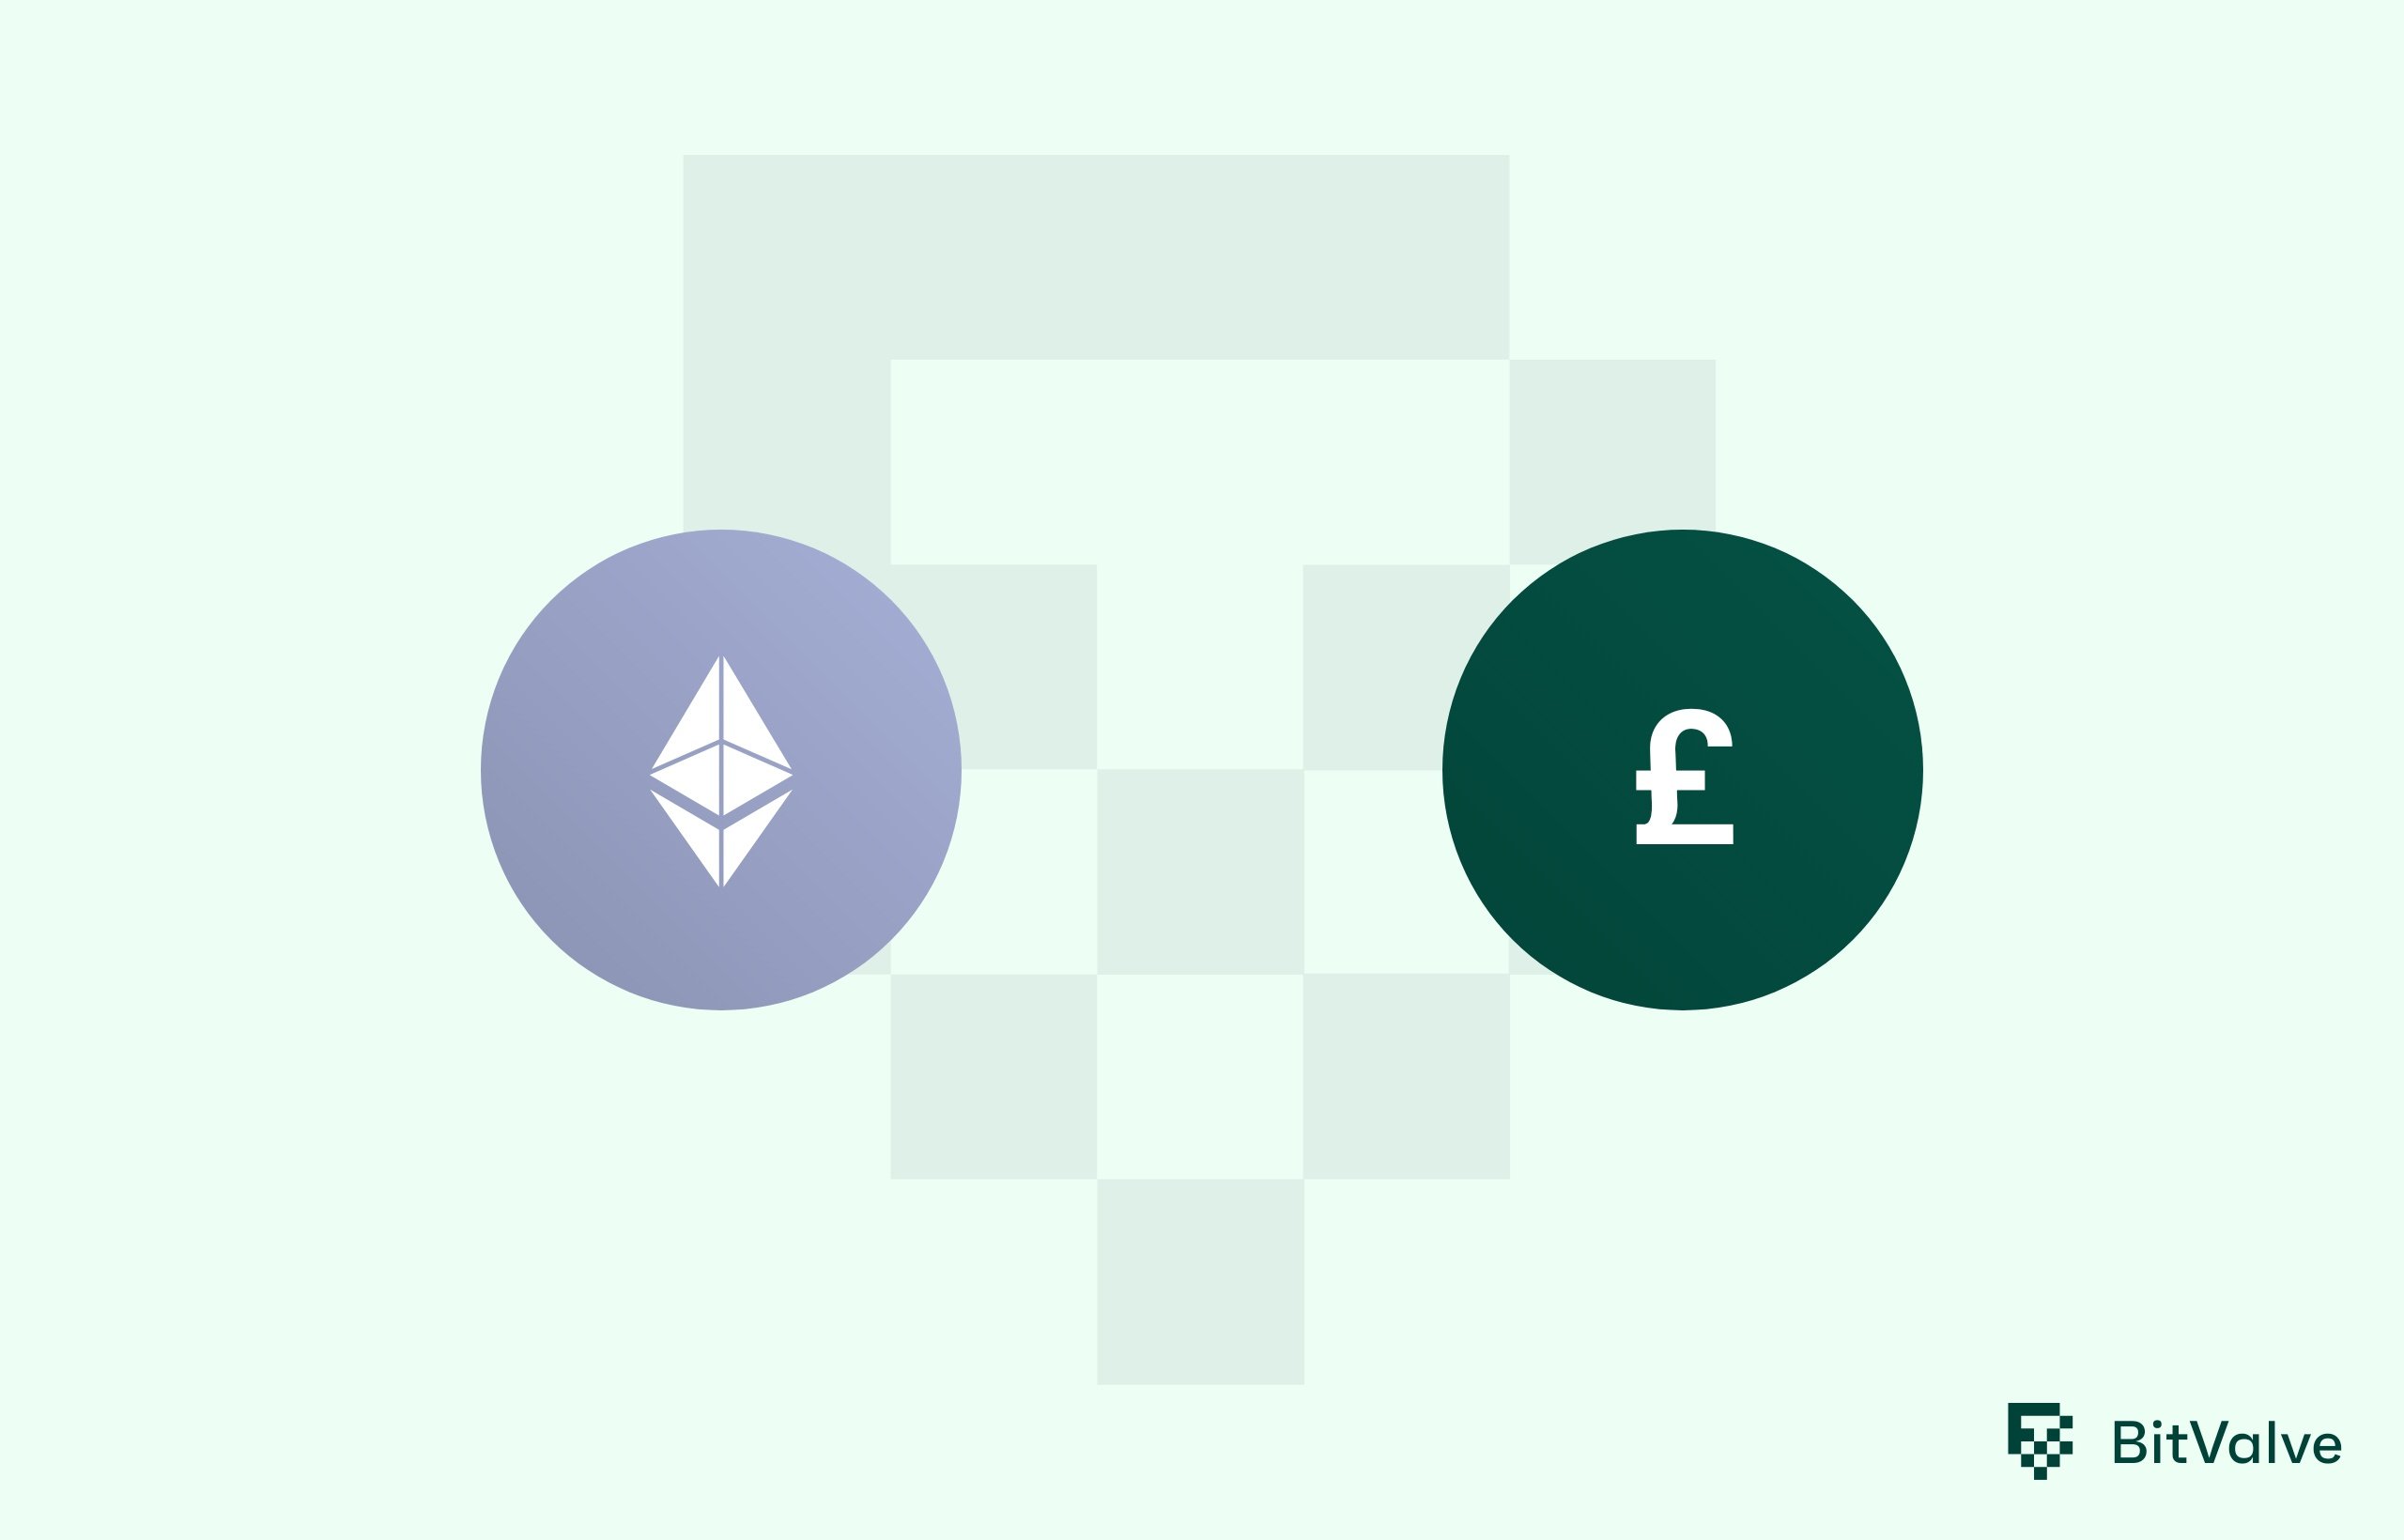 Convert 1 ETH to GBP - Ethereum price in GBP | CoinCodex